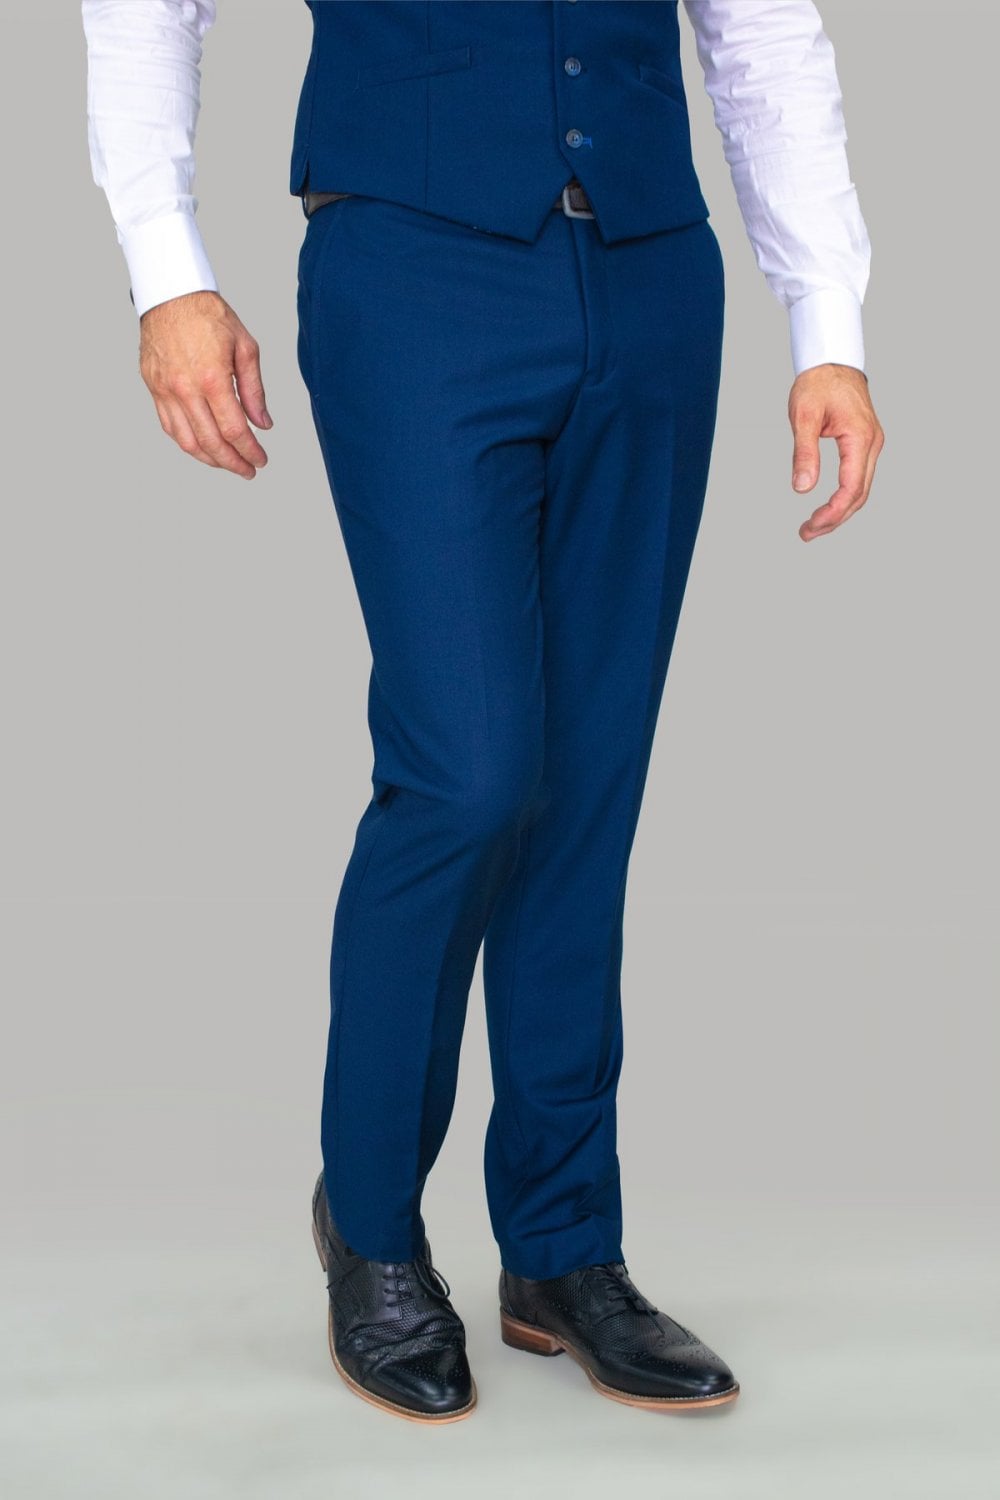 Dark Navy Trousers - STOCK CLEARANCE - Trousers - 32R - THREADPEPPER